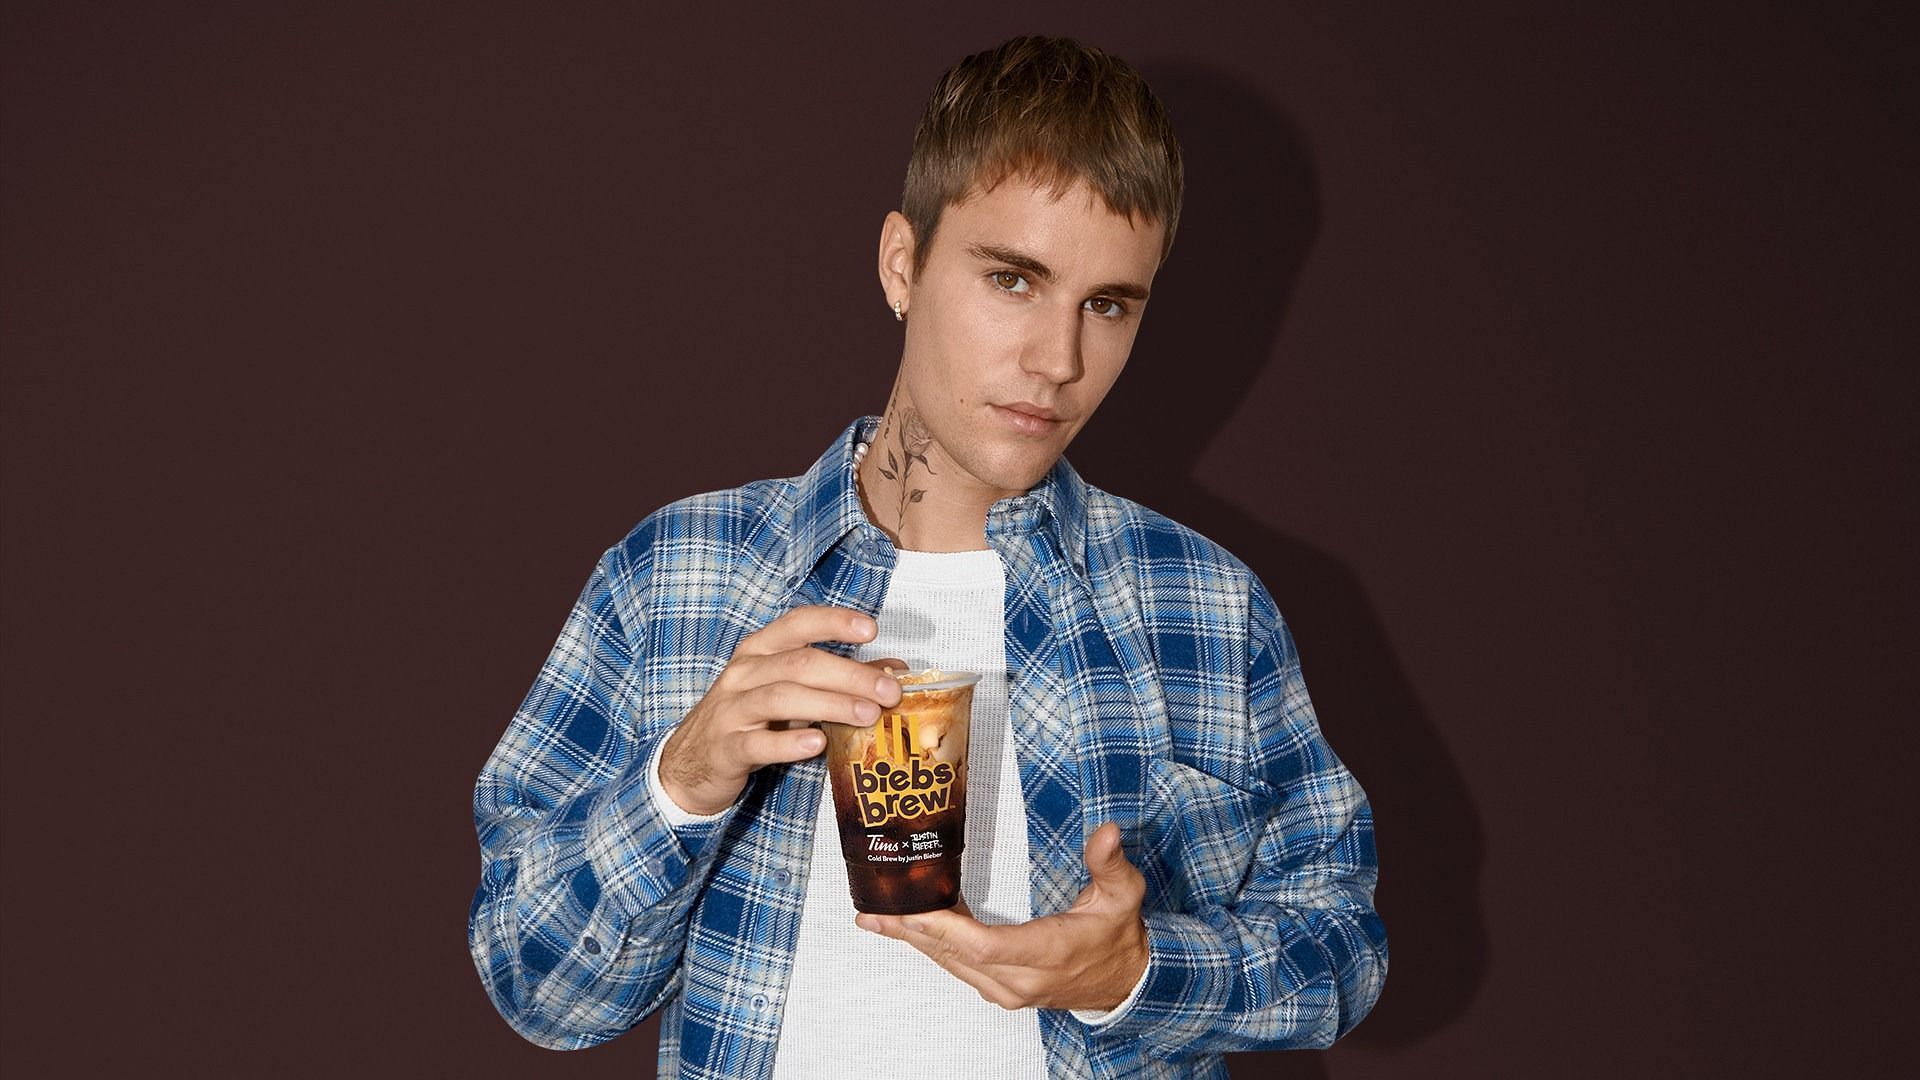 Tim Hortons collaborates with Justin Beiber for the second time to introduce Beibs Brew (Image via Tim Hortons)